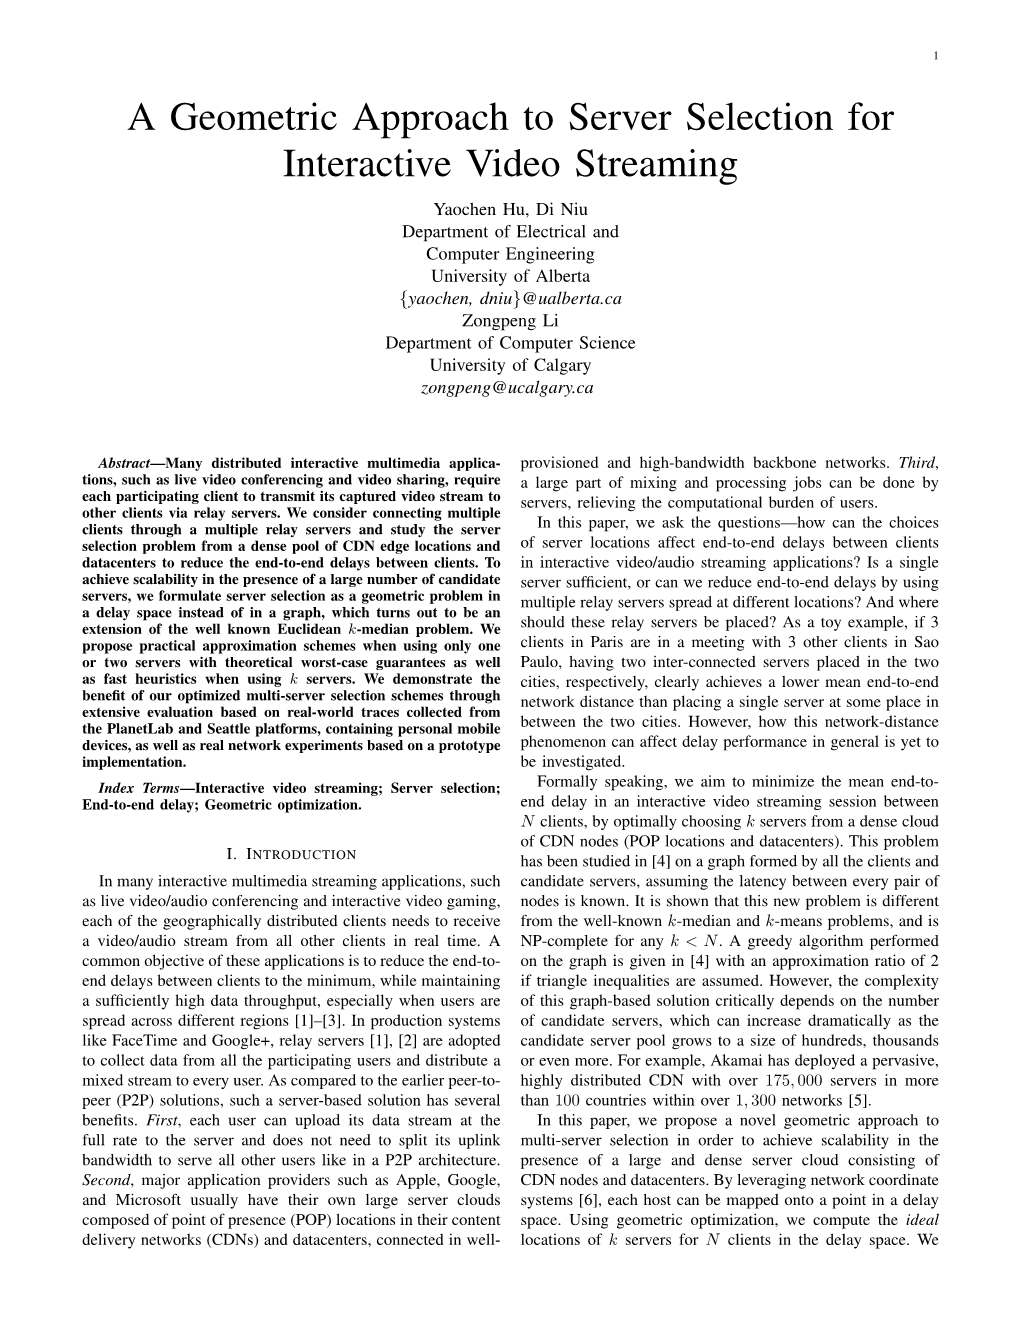 A Geometric Approach to Server Selection for Interactive Video Streaming